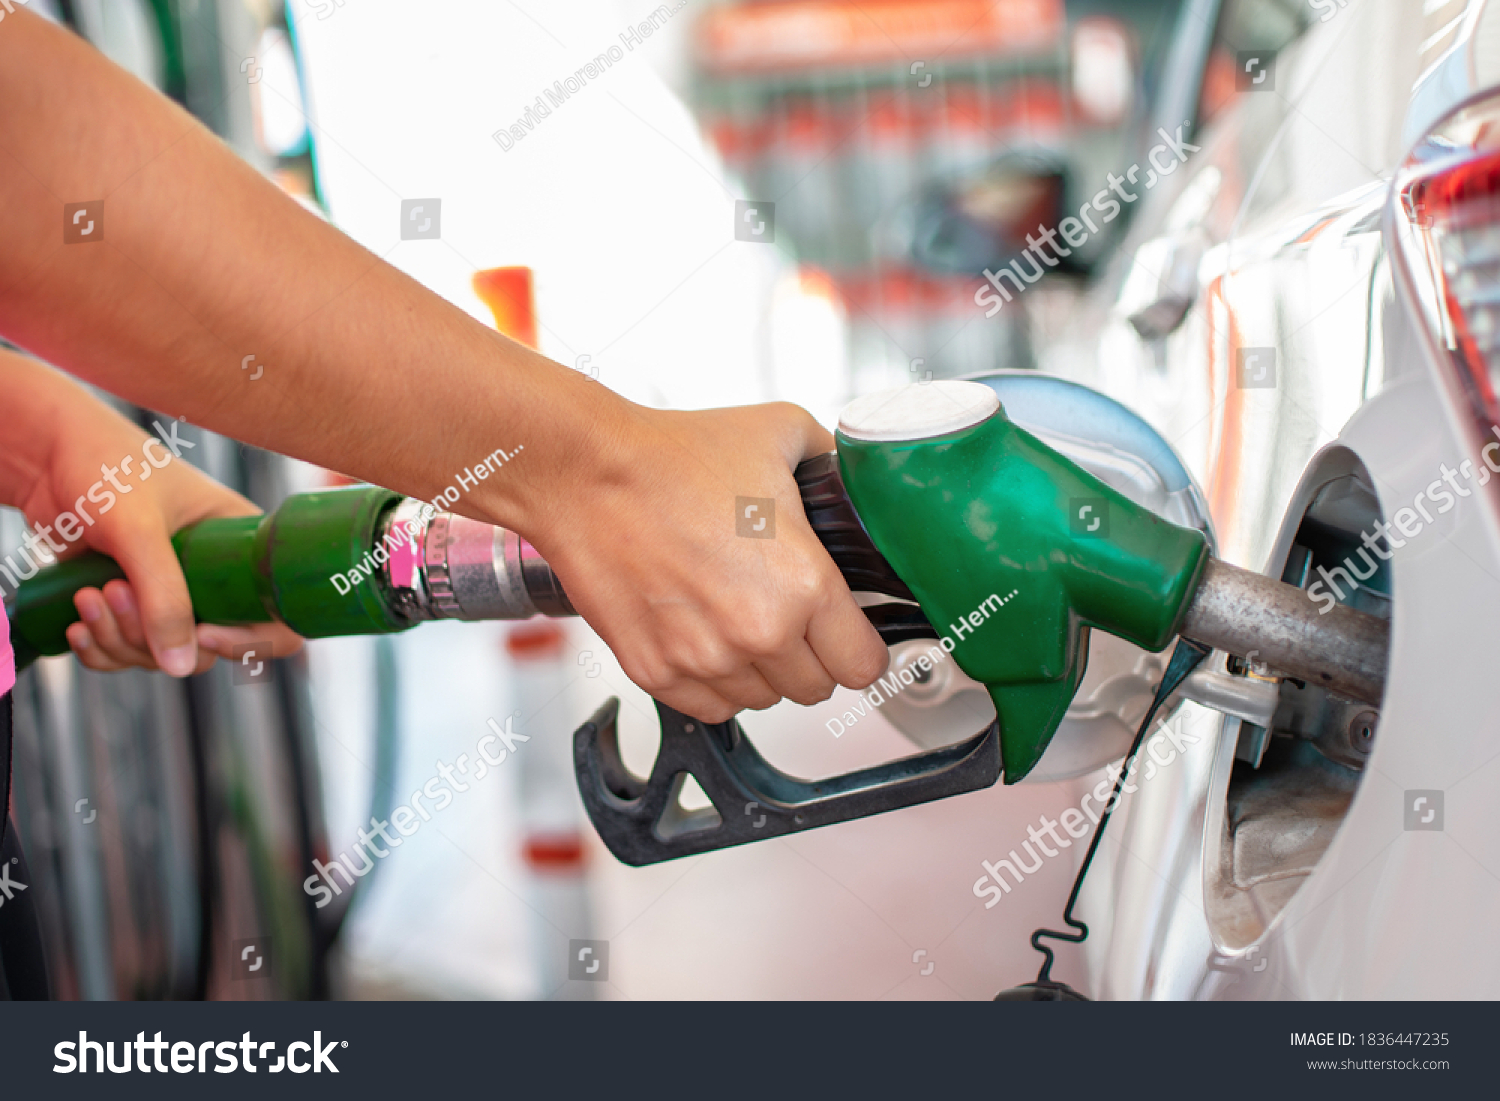 Filling up the car with petrol. Woman's hands pouring gasoline or gas into her car tank at fuel station #1836447235